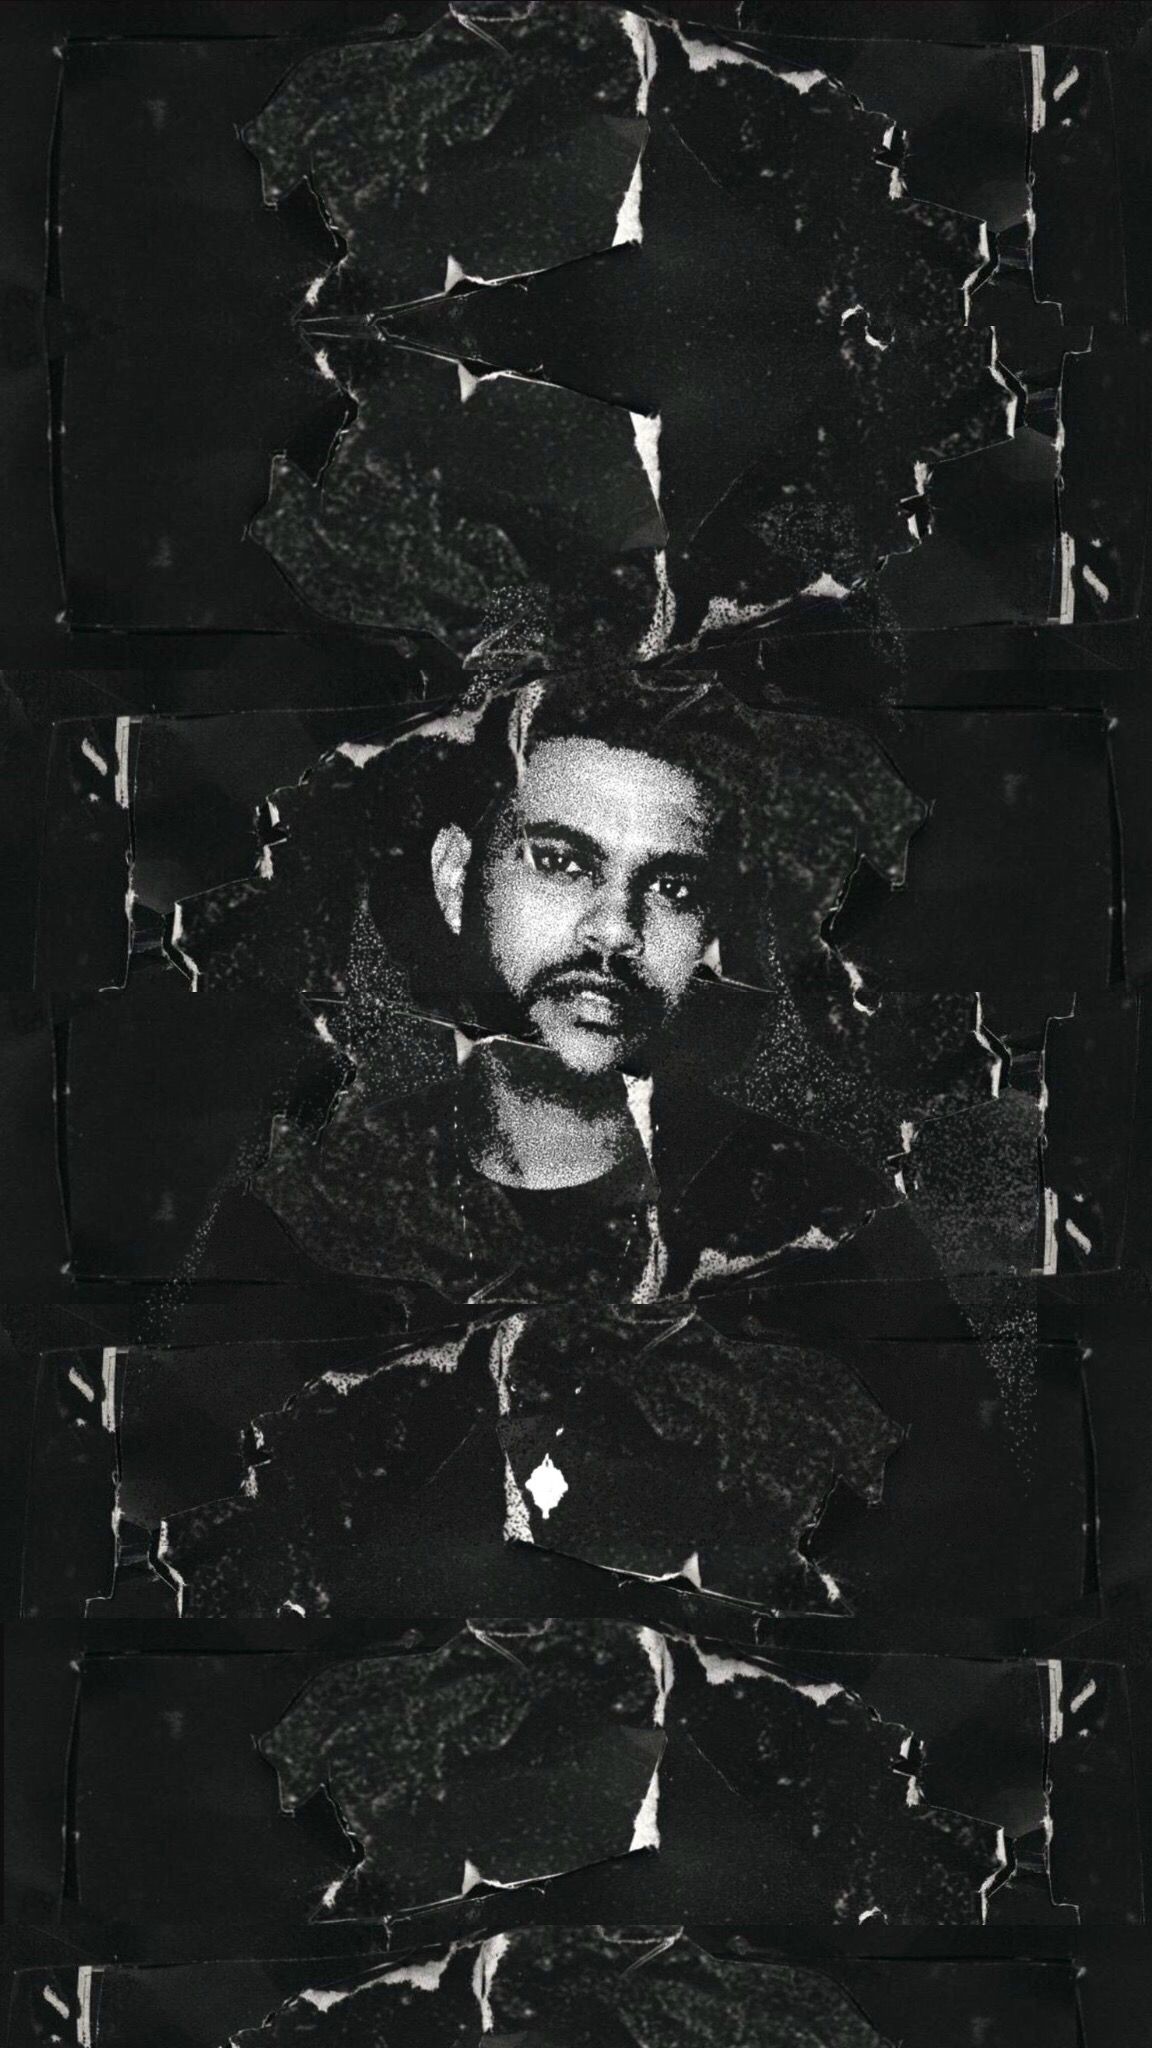 The Weeknd Wallpapers (76+ pictures)